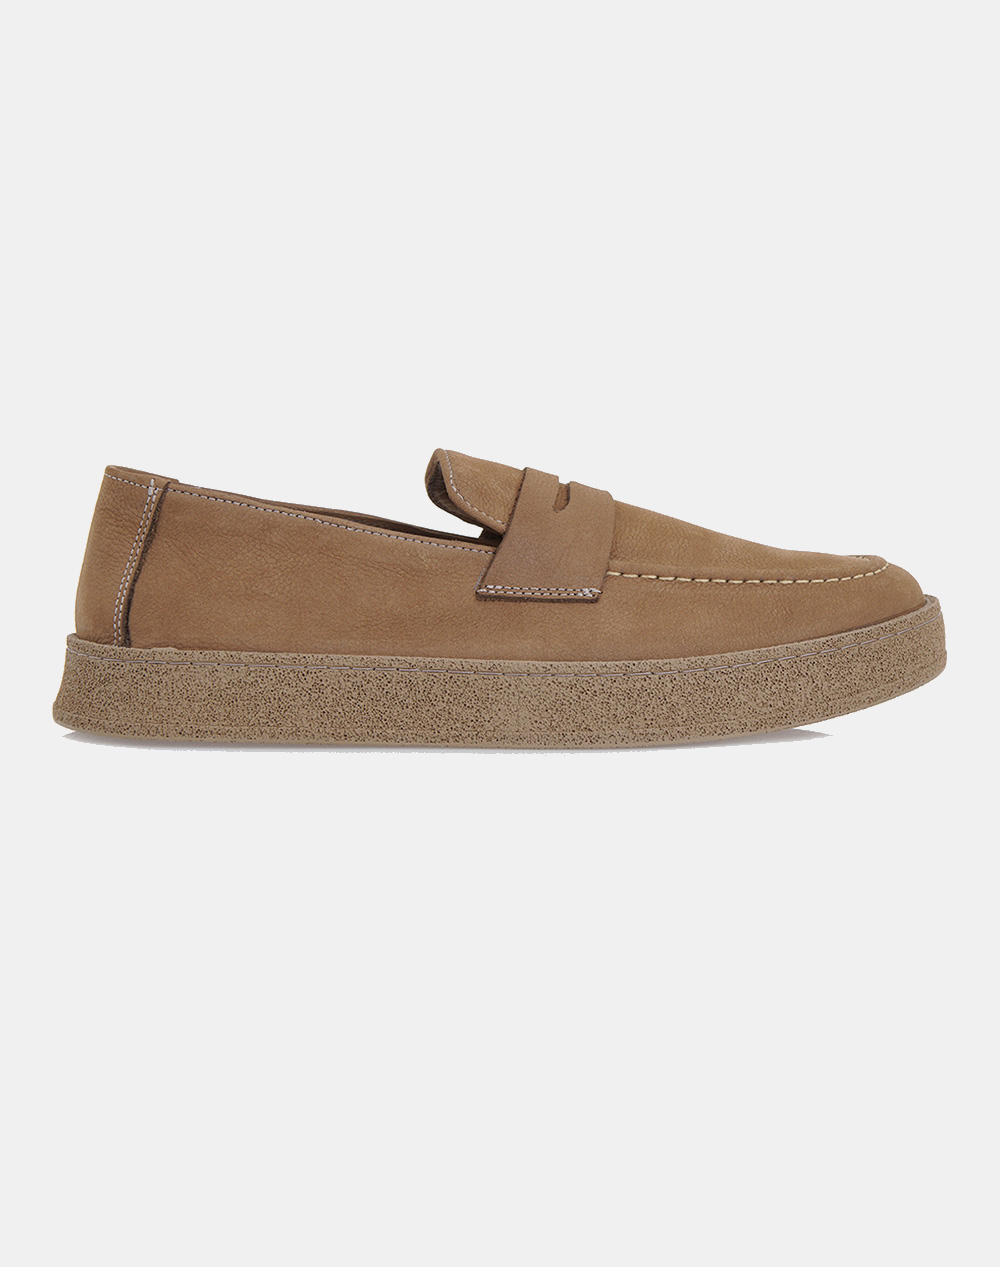 LORENZO RUSSO LOAFERS S542B0032952-952 CookieBrown